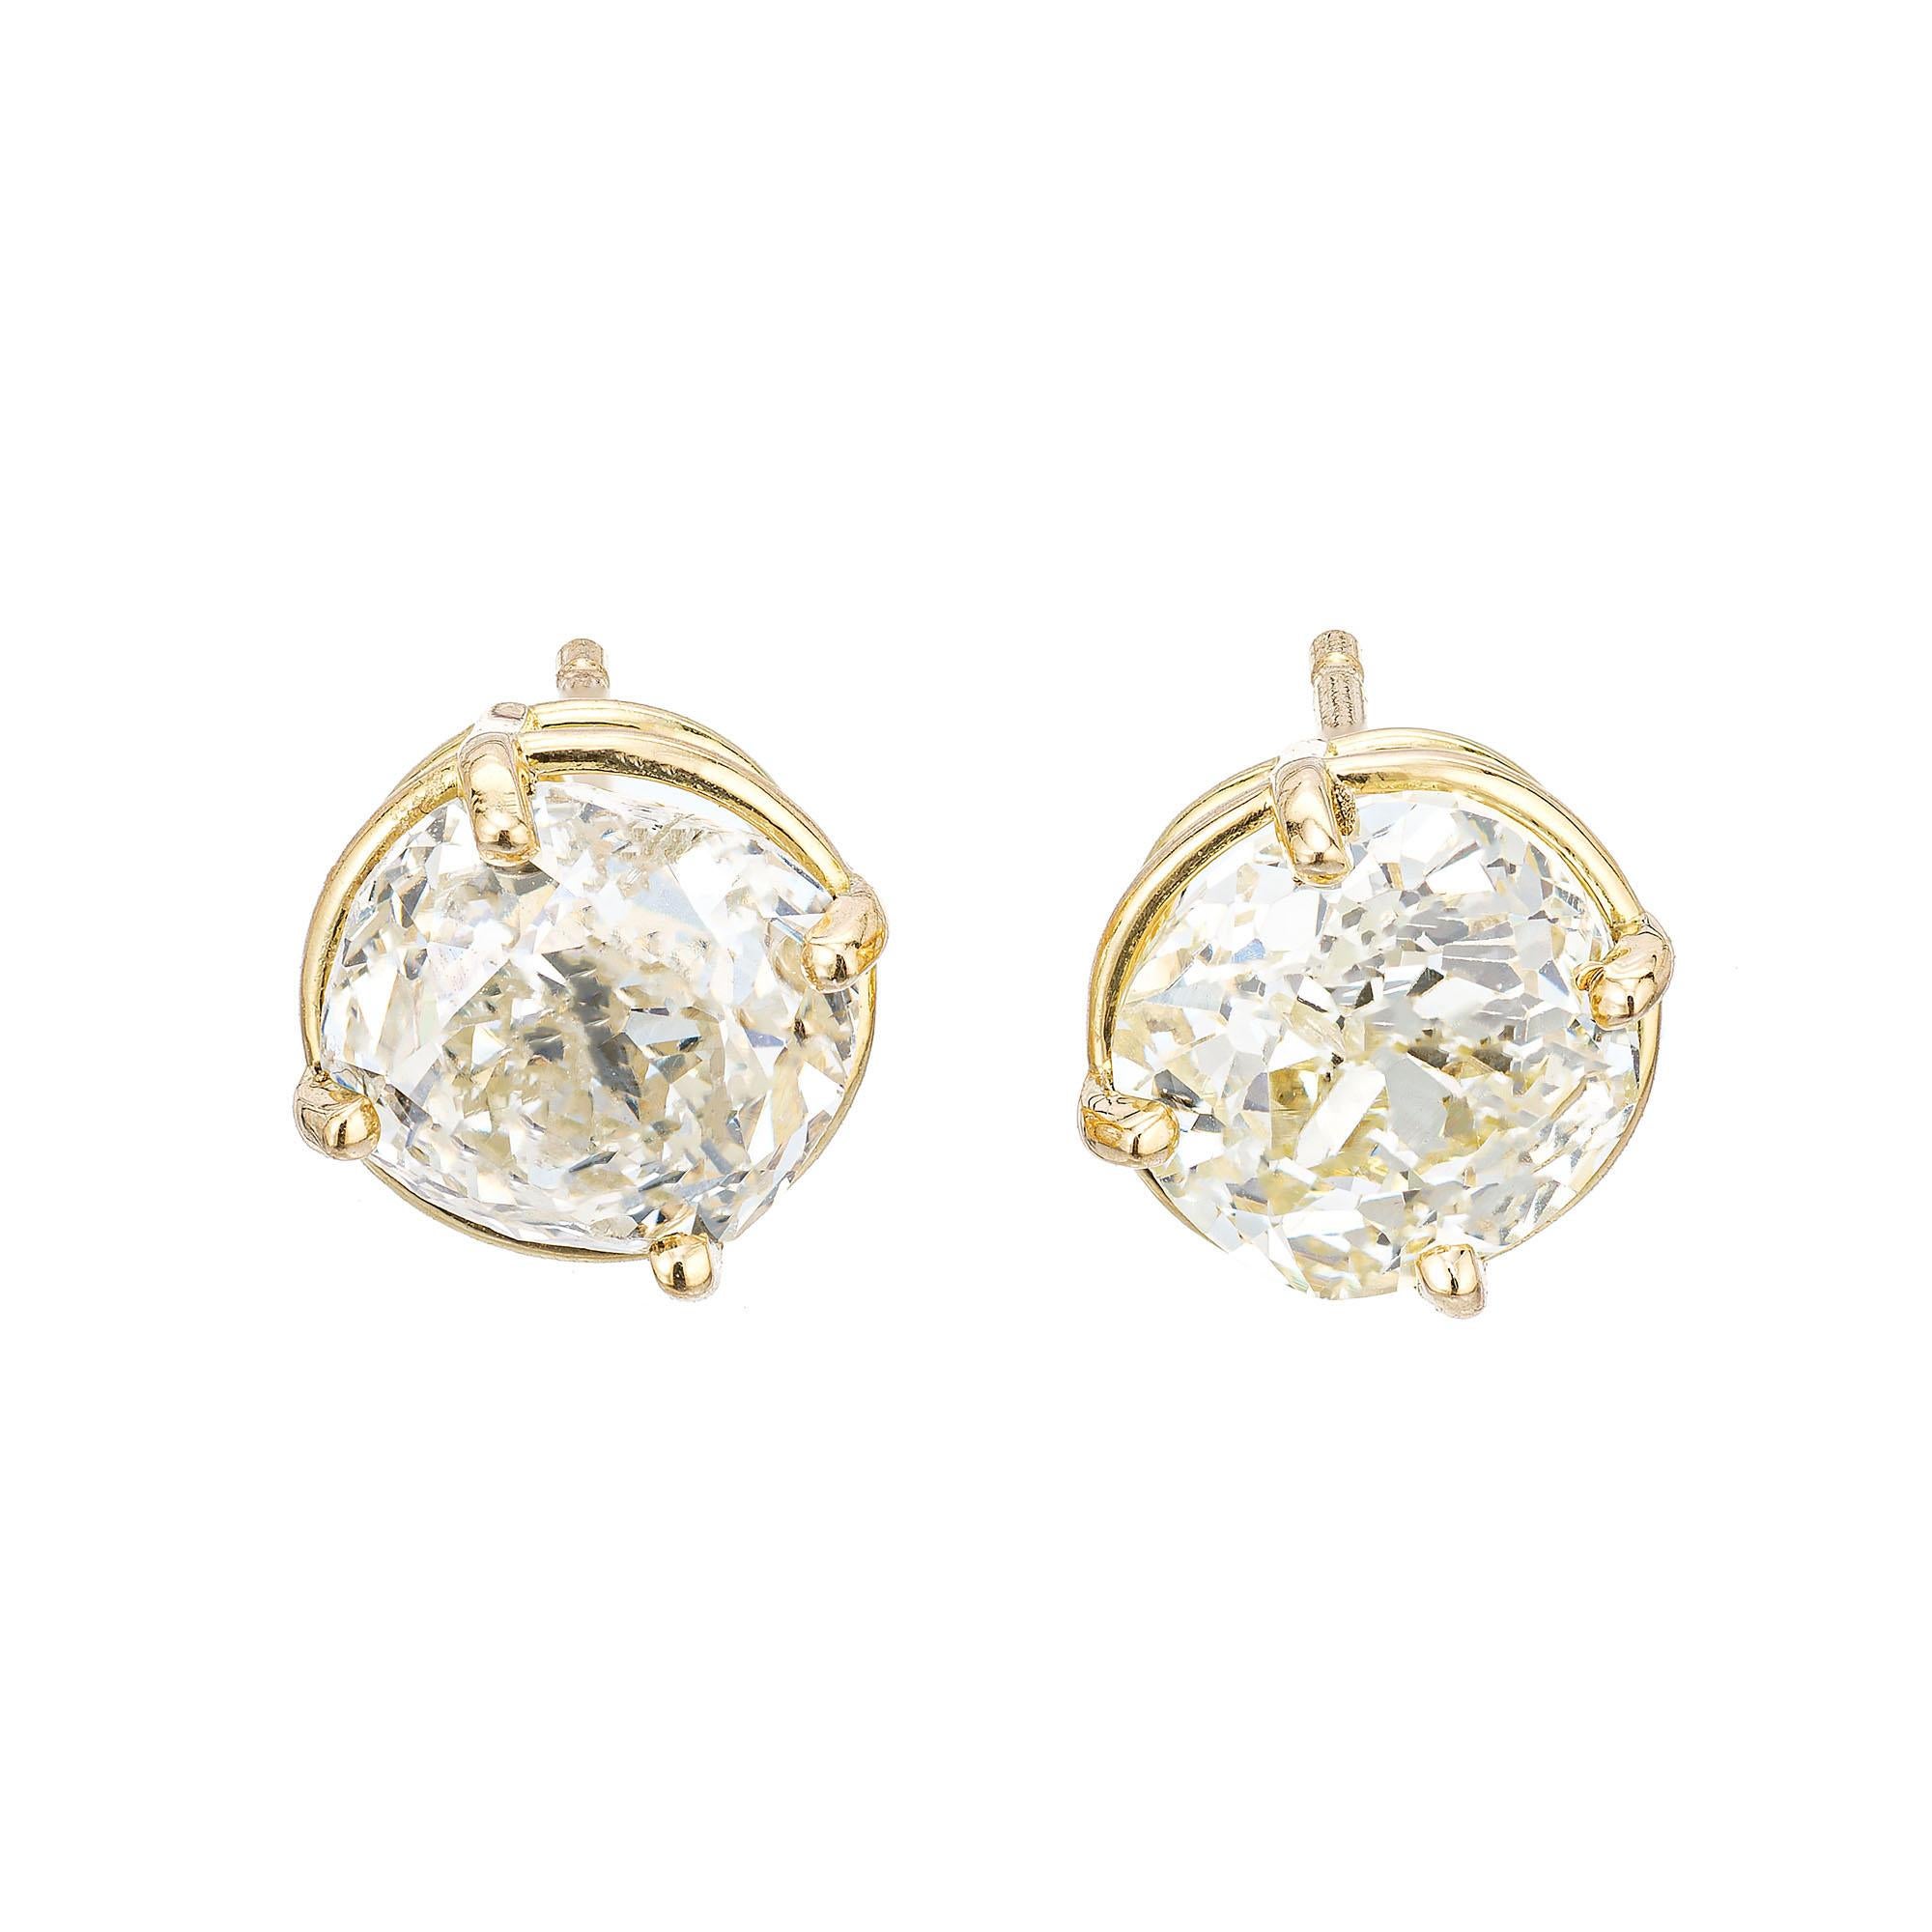 Original old mine cushion cut diamond stud earrings. GIA certified diamonds circa 1880. Set in new 18k yellow gold classis basket setting. Designed and crafted in the Peter Suchy workshop.

1 old mine cut diamond , U-V SI2 approx. 1.57cts GIA